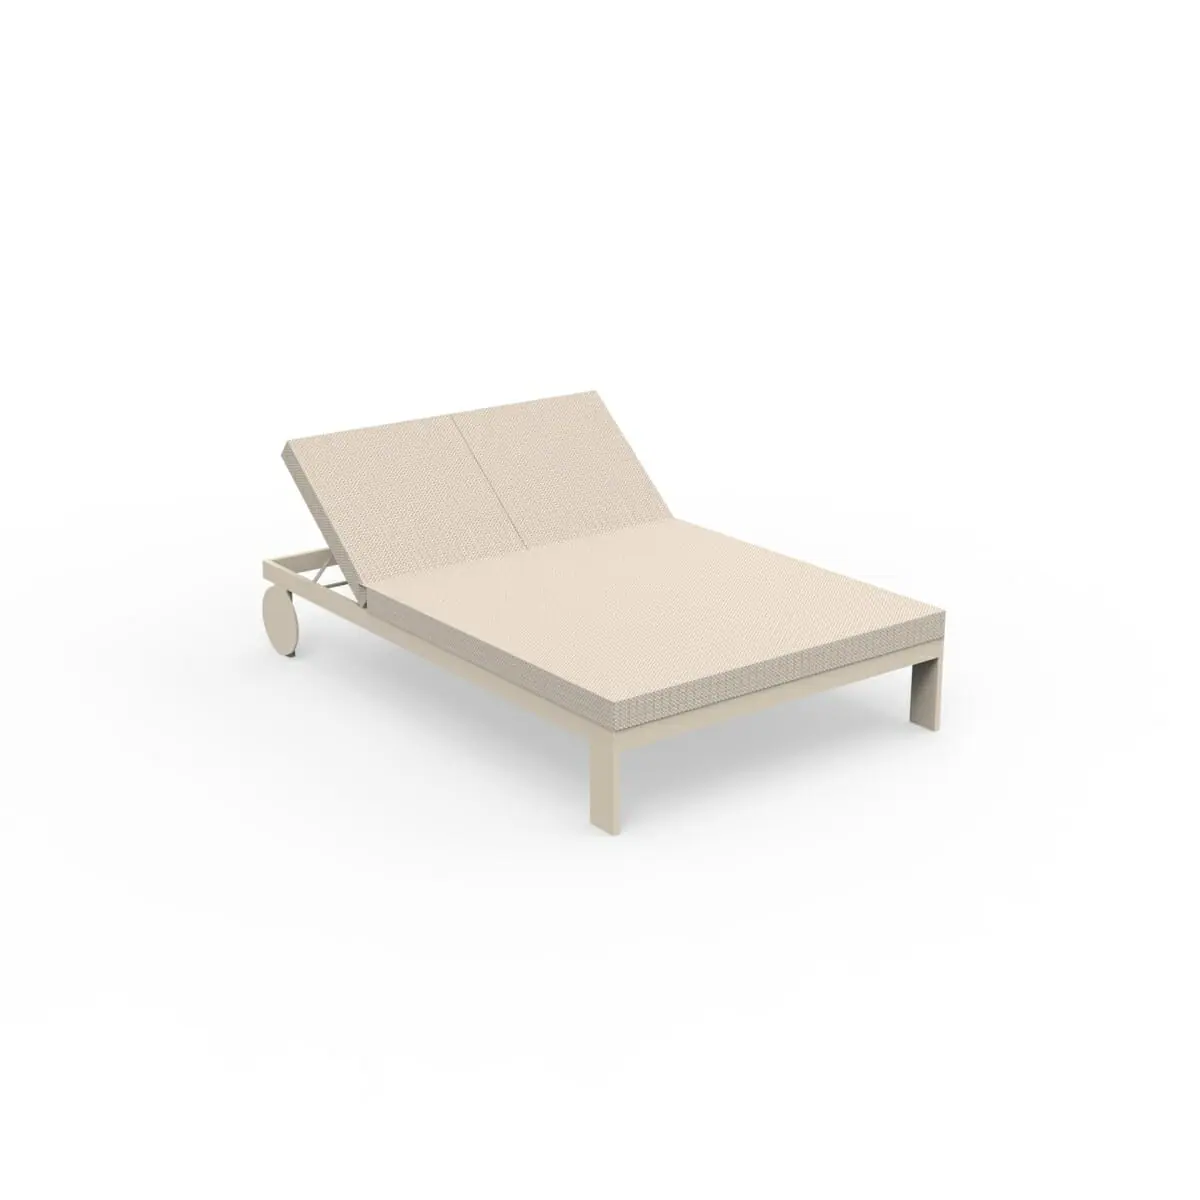 84607-83490-posidonia-outdoor-furniture-collection